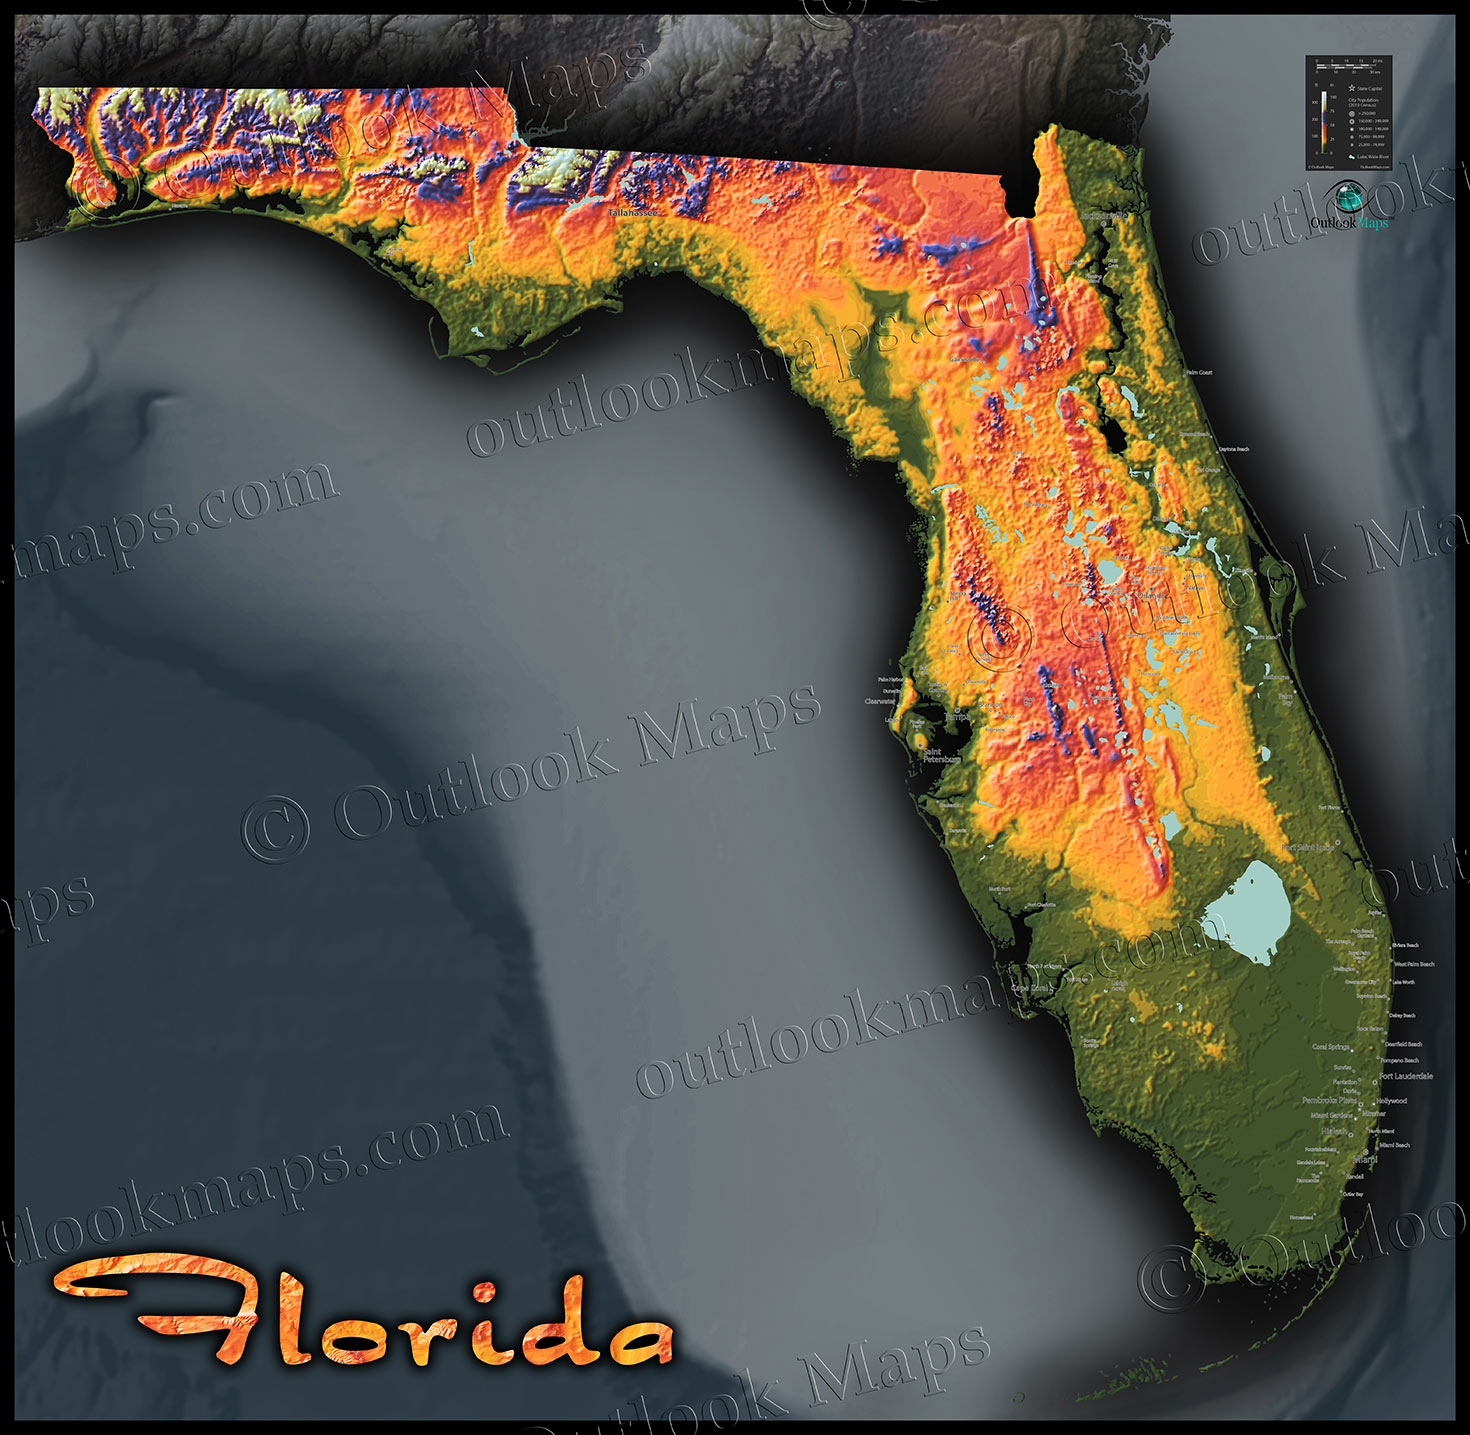 Florida Topography Map | Colorful Natural Physical Landscape - South Florida Topographic Map